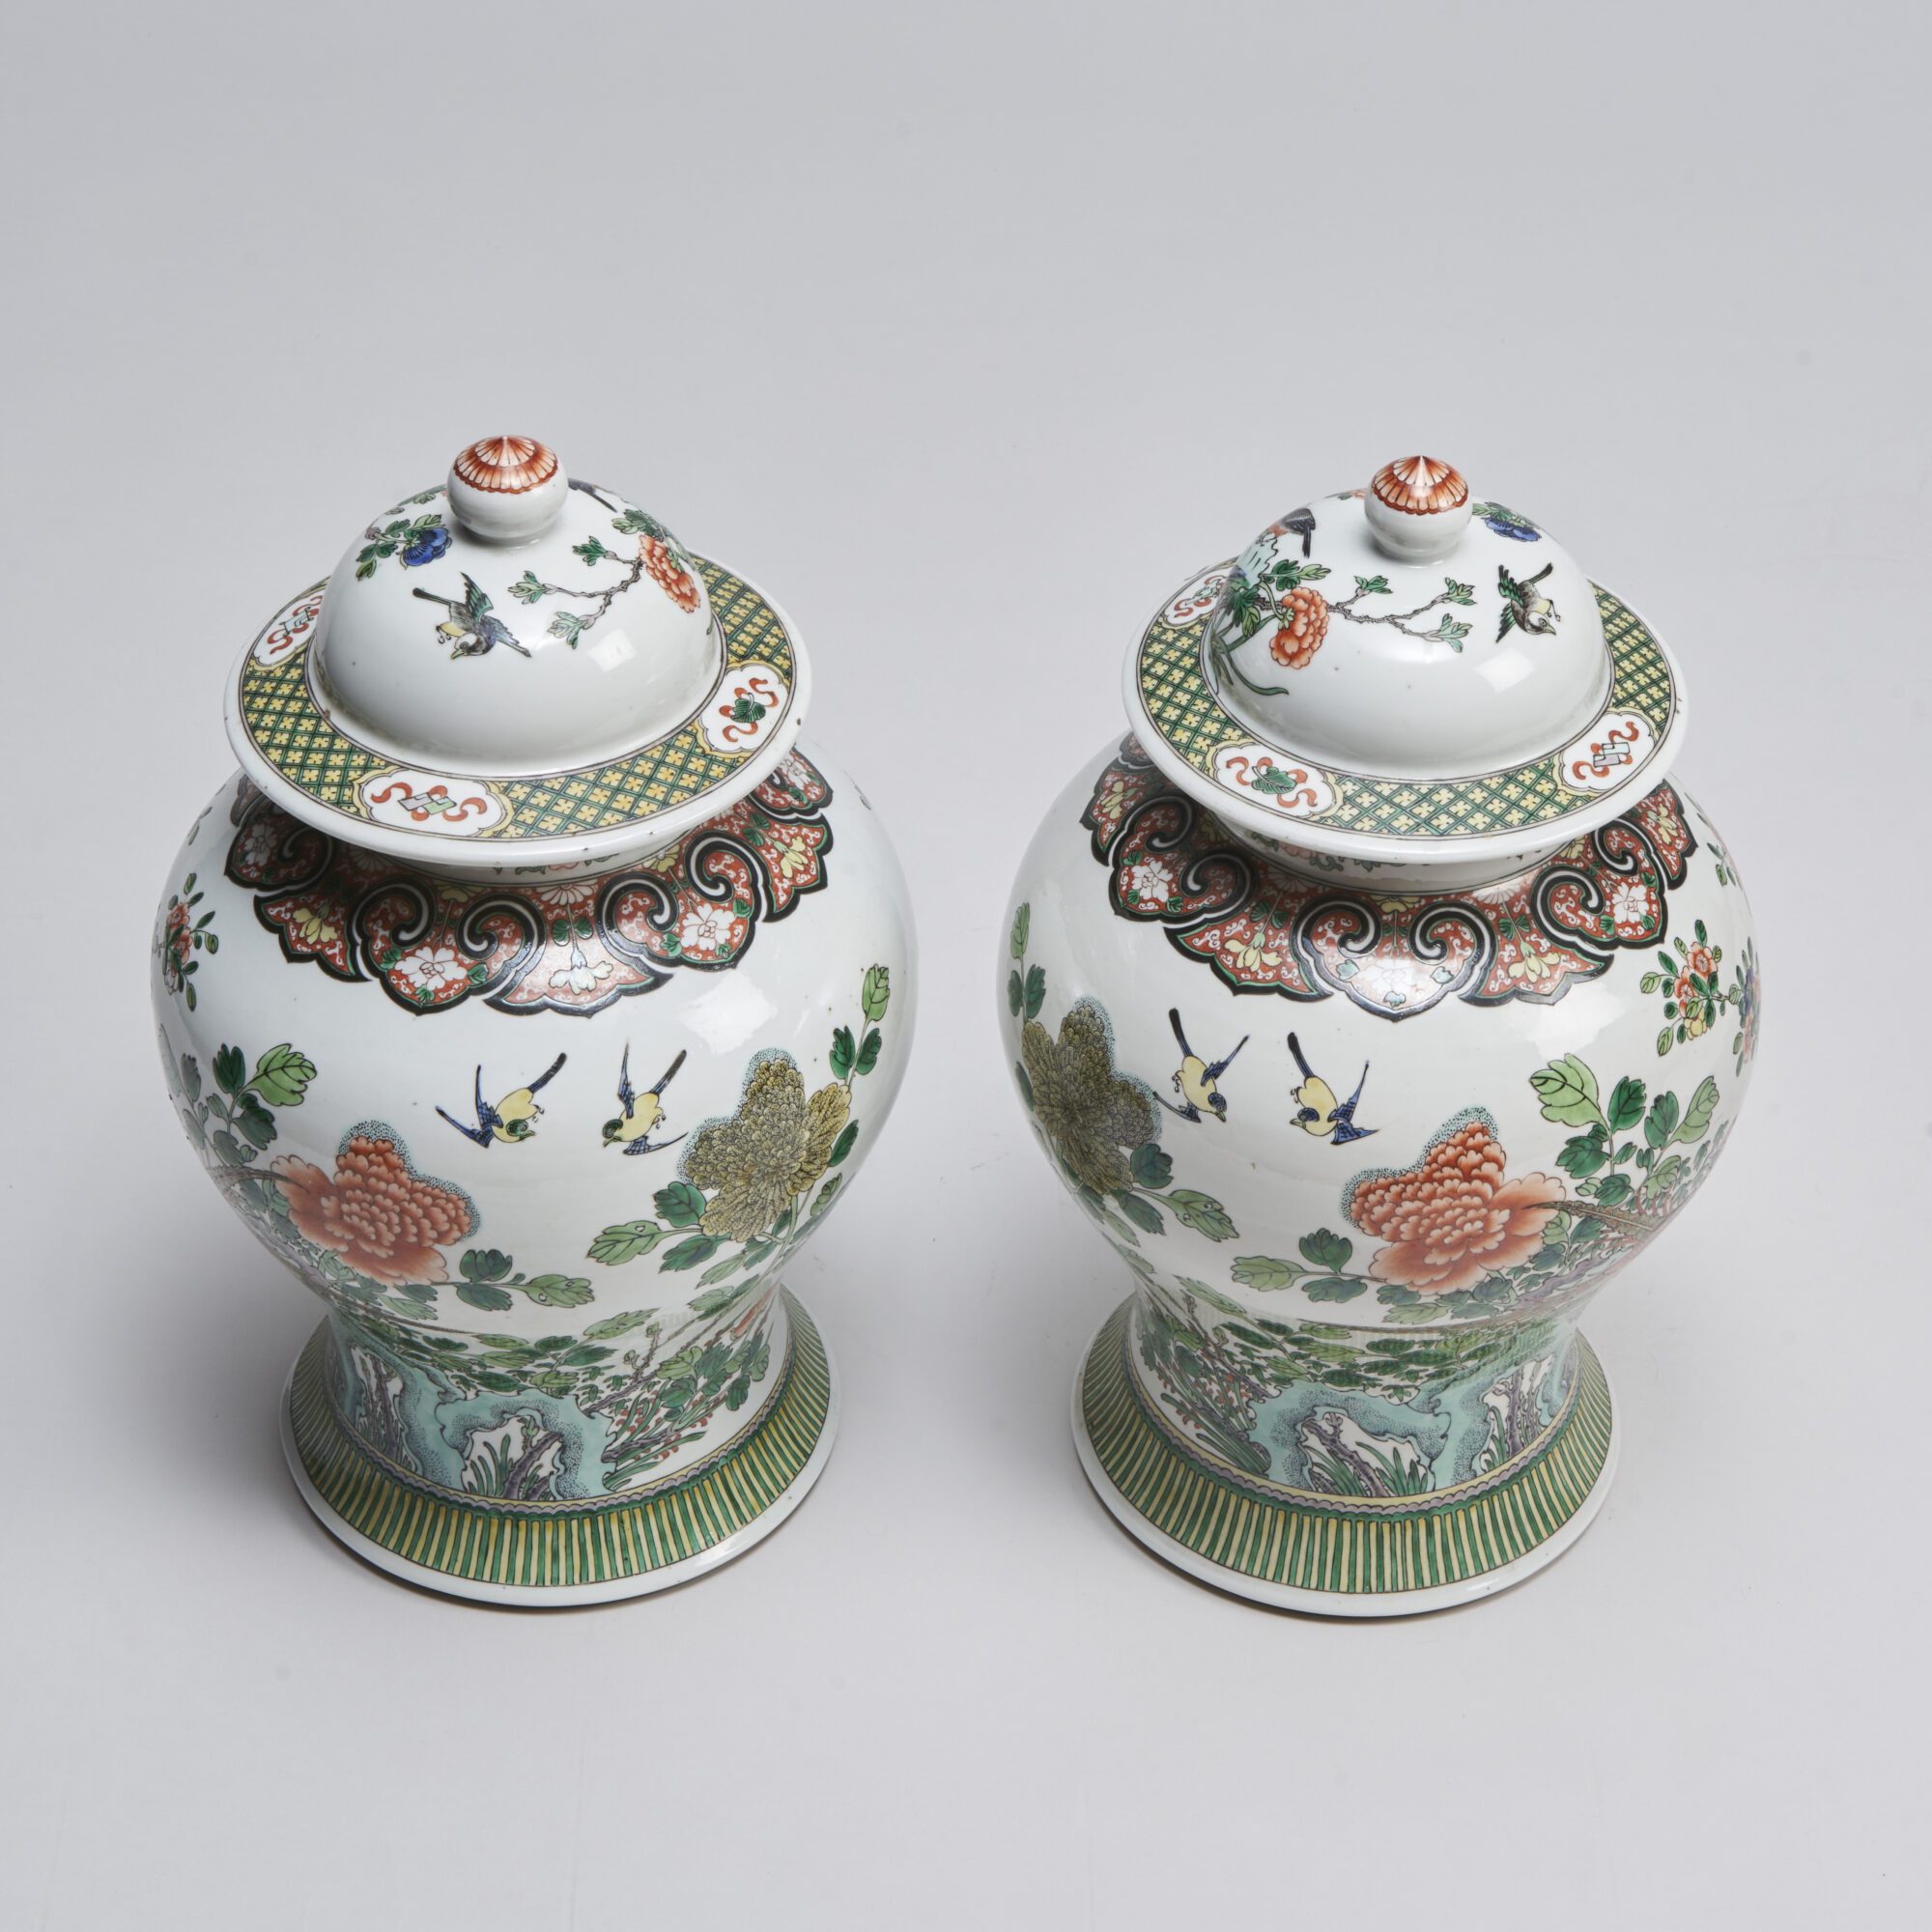 A pair of ceramic Chinese jars and covers from Kevin Page